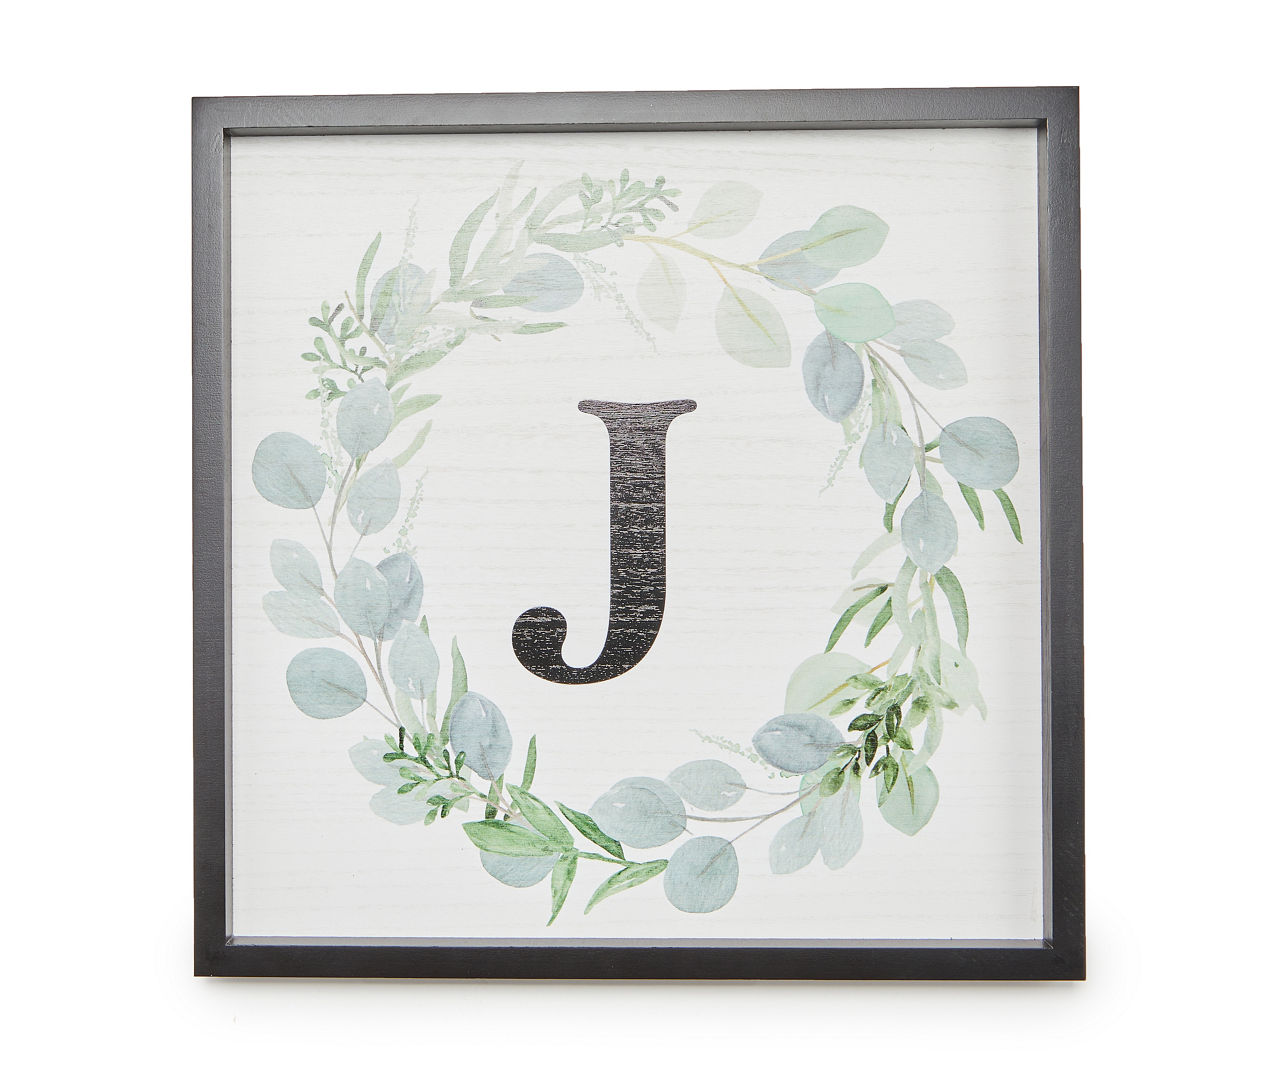 "J" White, Green & Black Wreath Initial Framed Wall Plaque